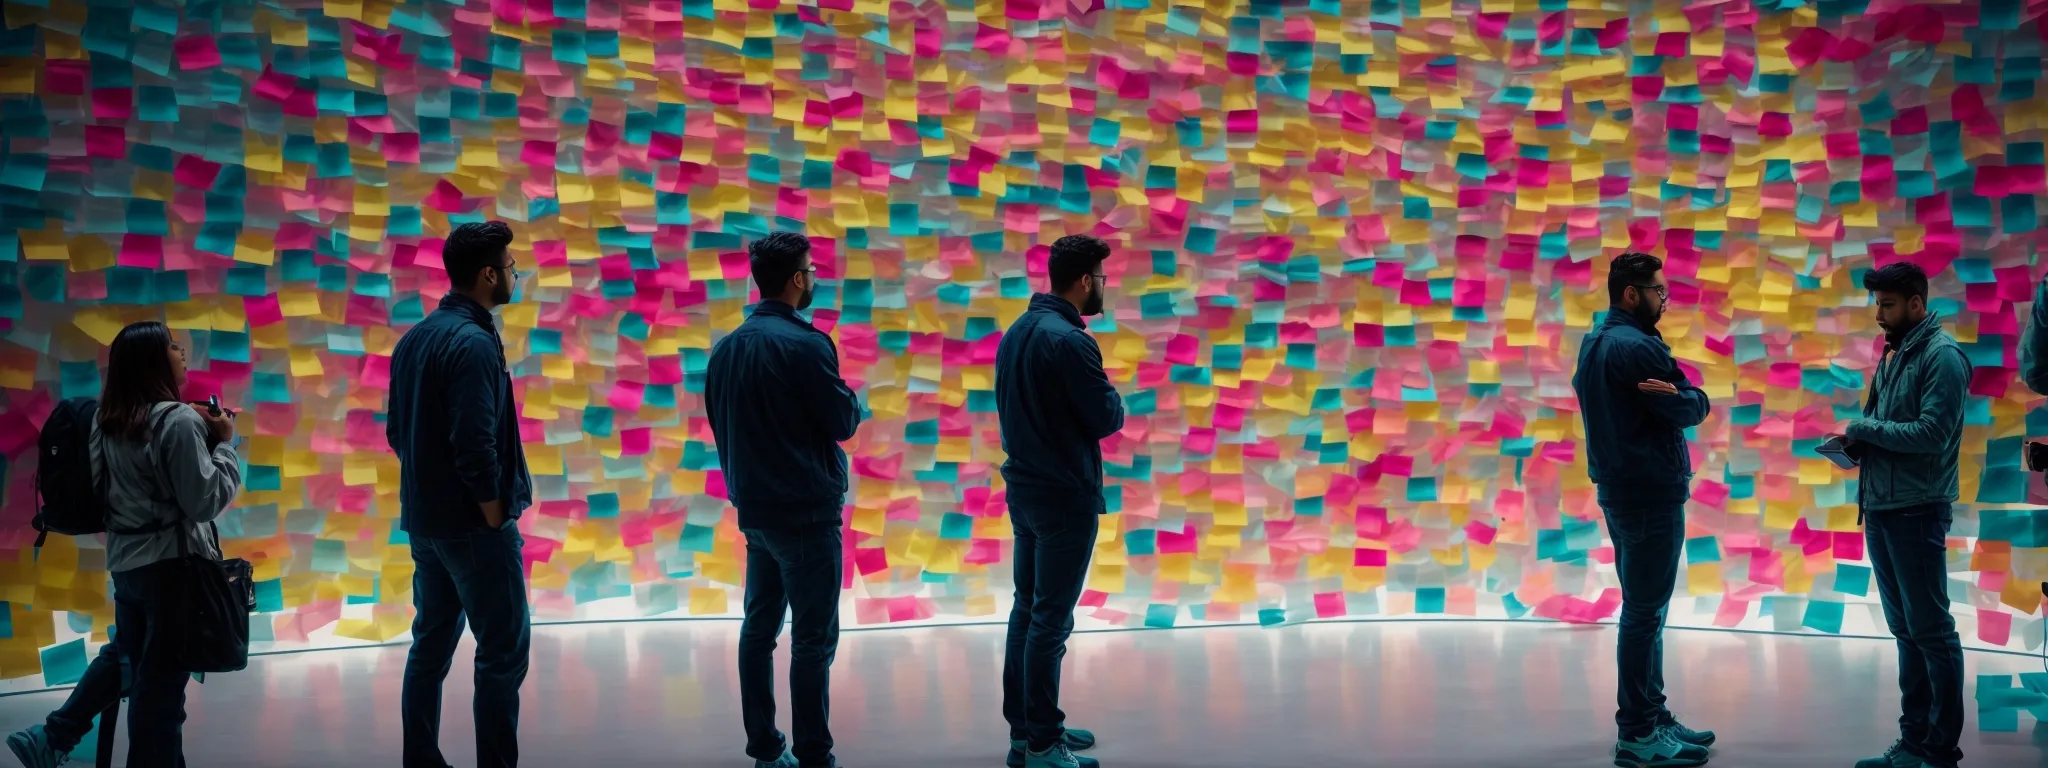 a team is gathered around a large digital screen, organizing colorful sticky notes into columns.